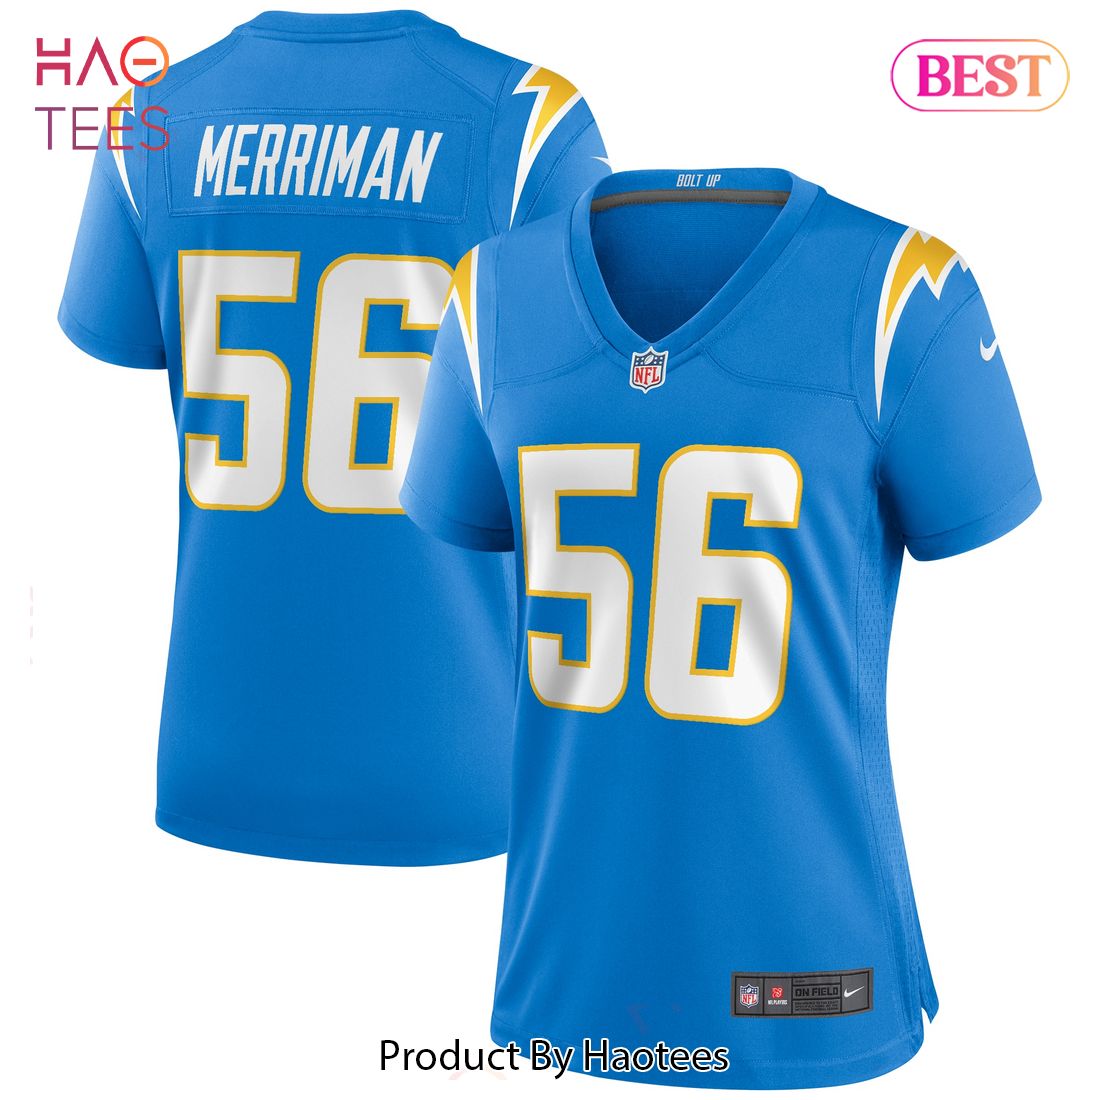 Shawne Merriman Los Angeles Chargers Nike Women’s Game Retired Player Jersey Powder Blue